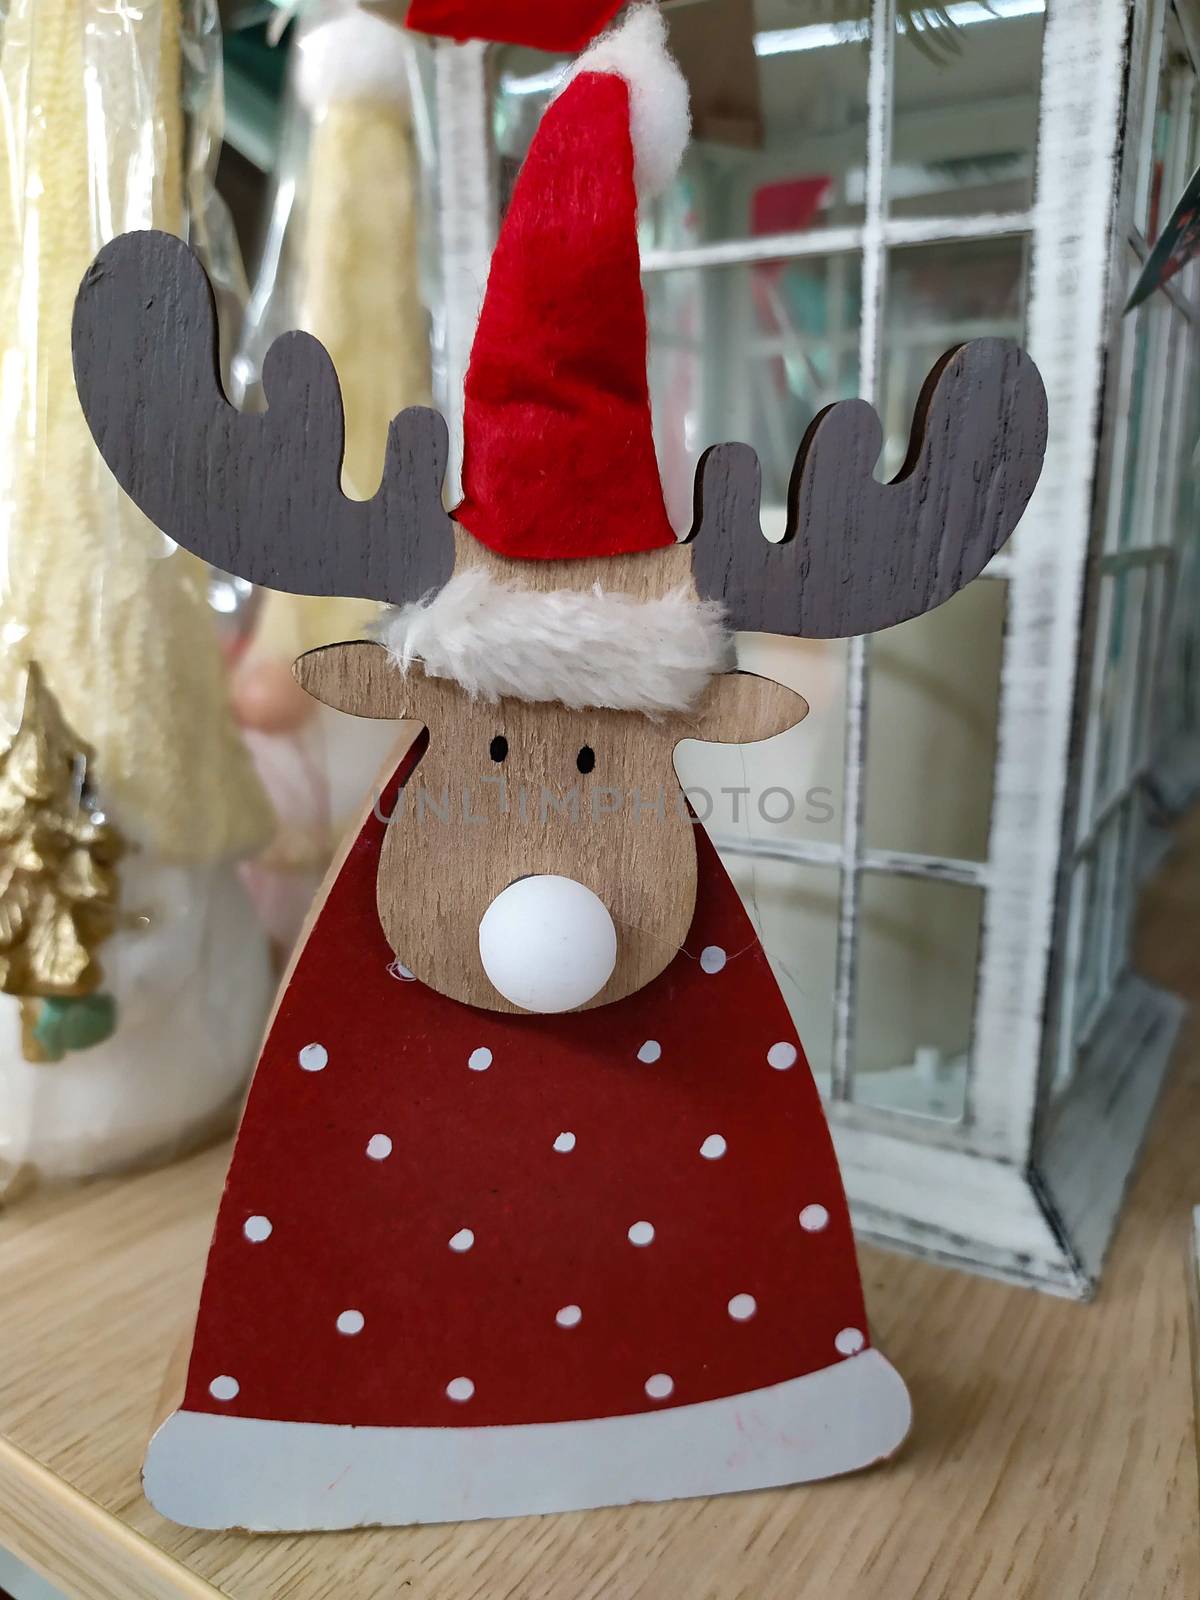 Christmas decorations in a shop, items on sale for the holidays by brambillasimone